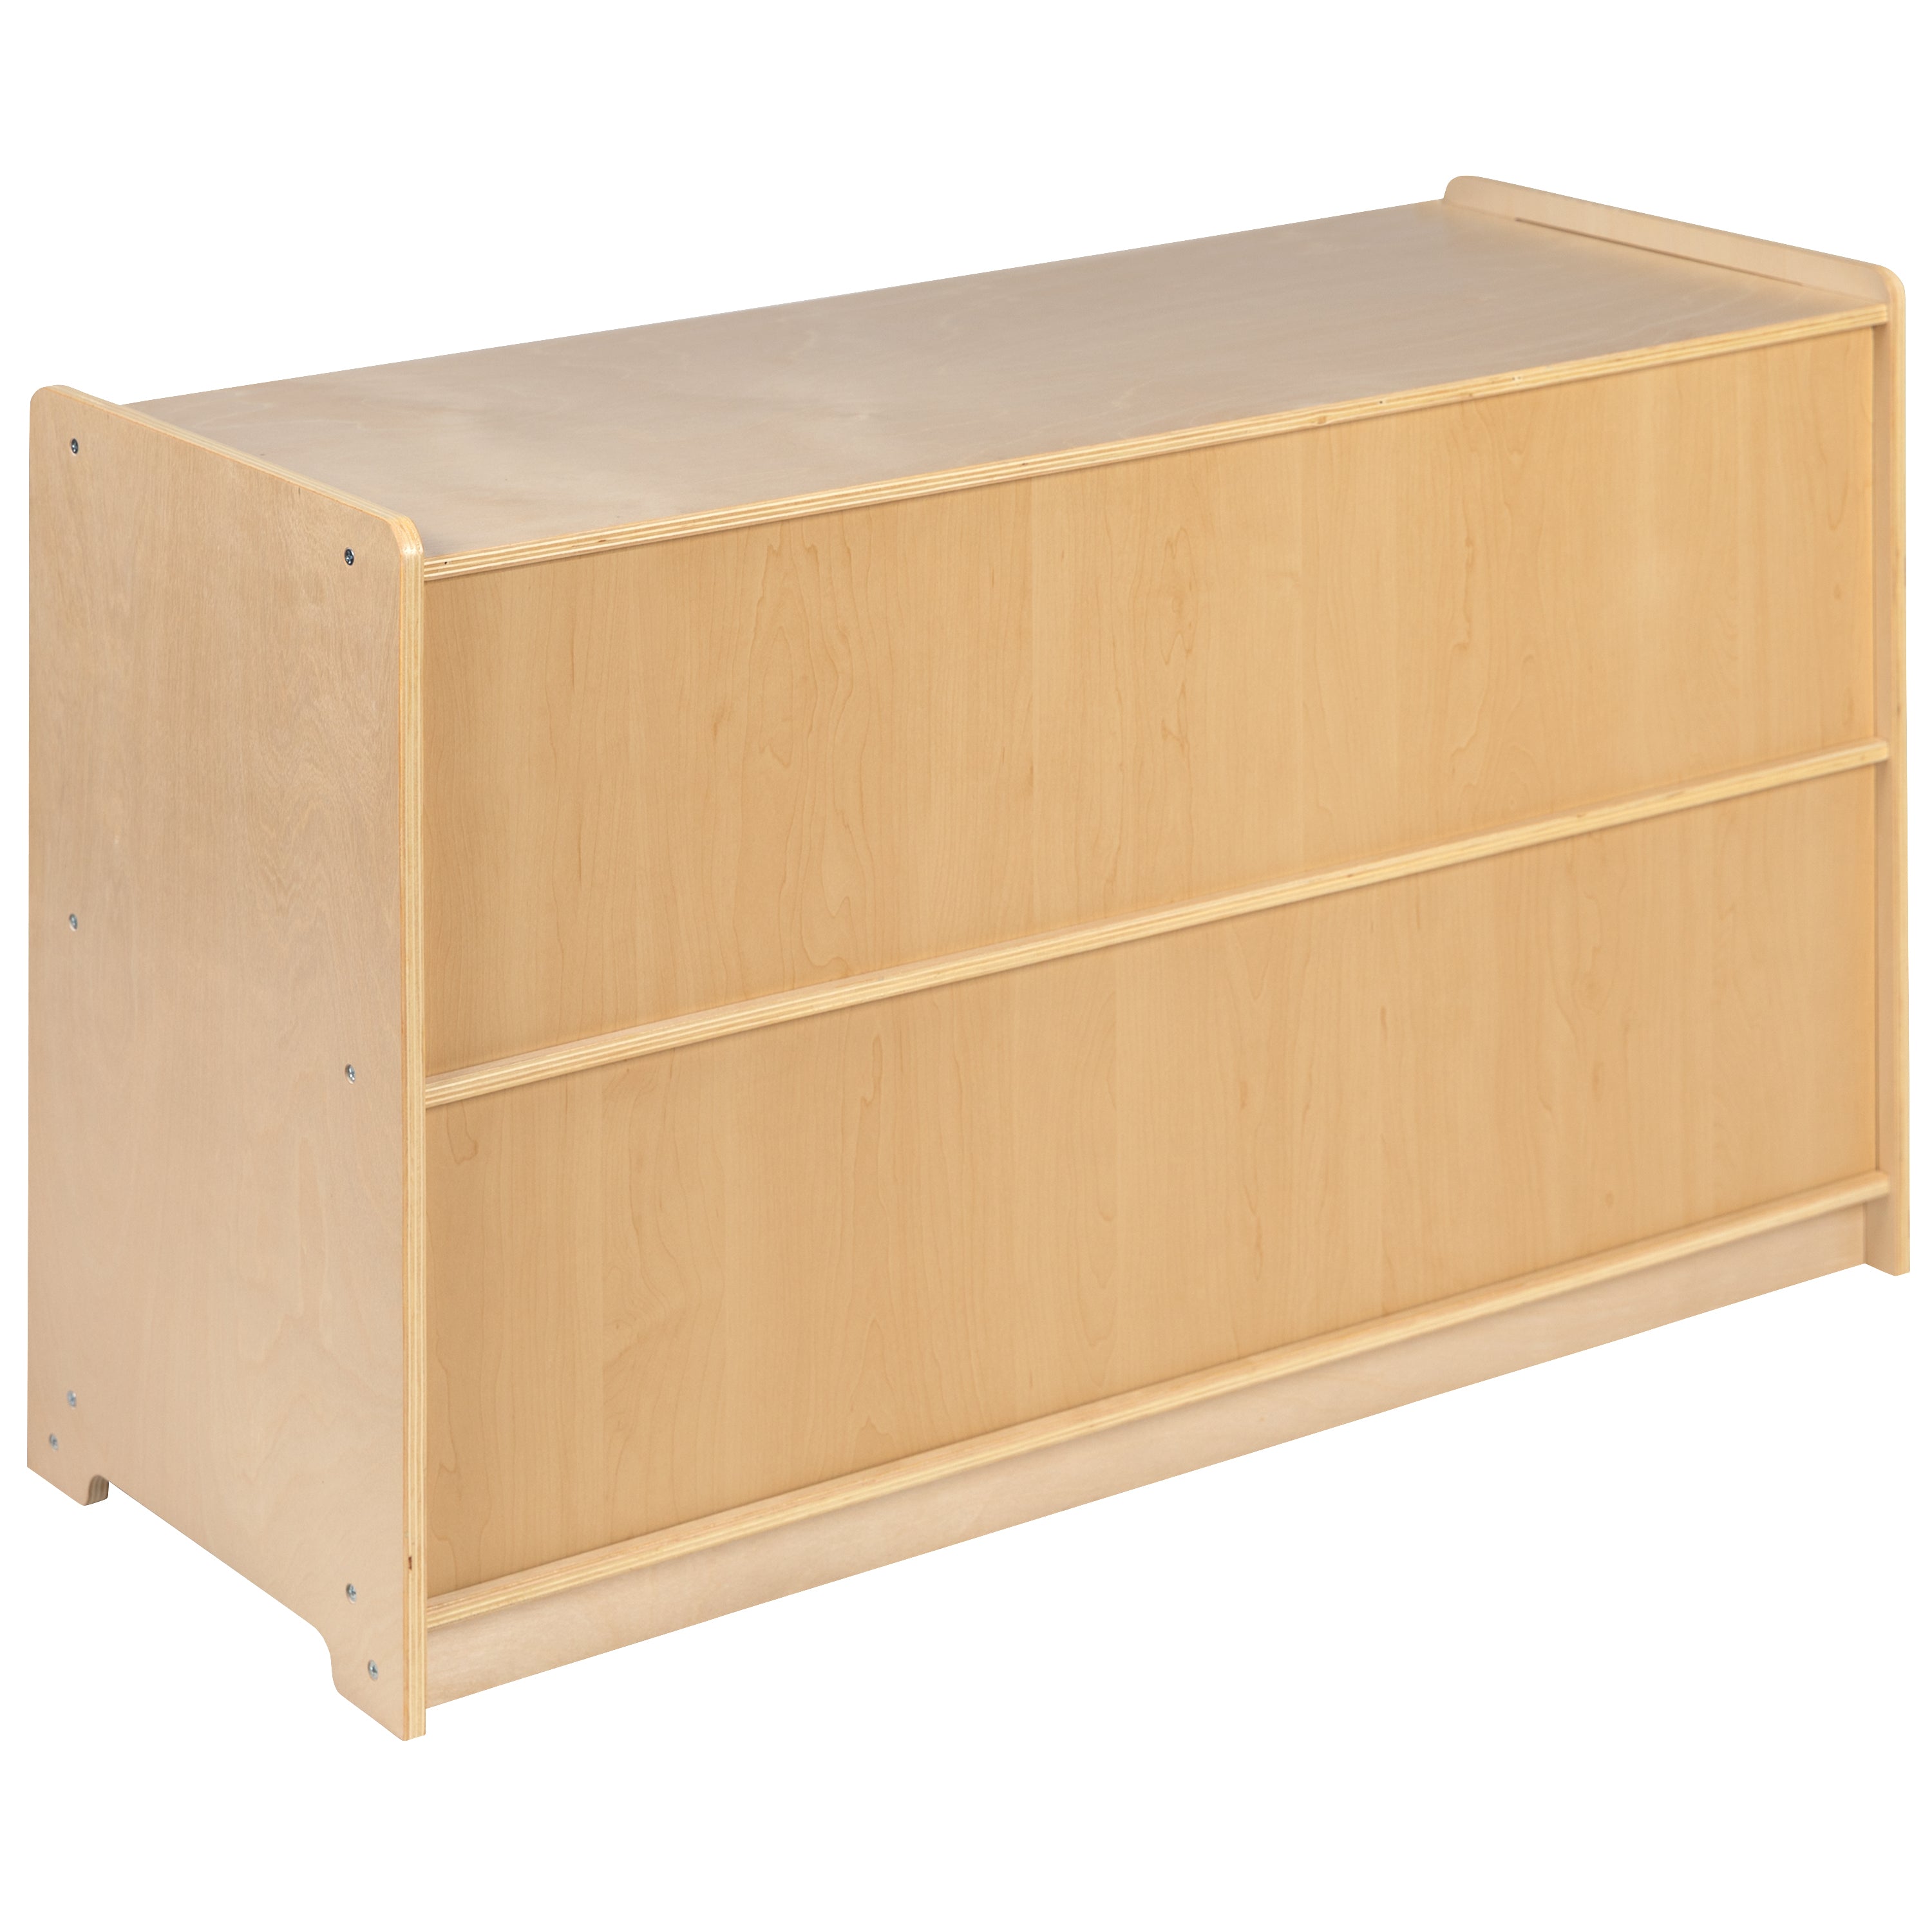 Wooden School Classroom Storage Cabinet for Commercial or Home Use - Safe, Kid Friendly Design (Natural)-Classroom Storage-Flash Furniture-Wall2Wall Furnishings